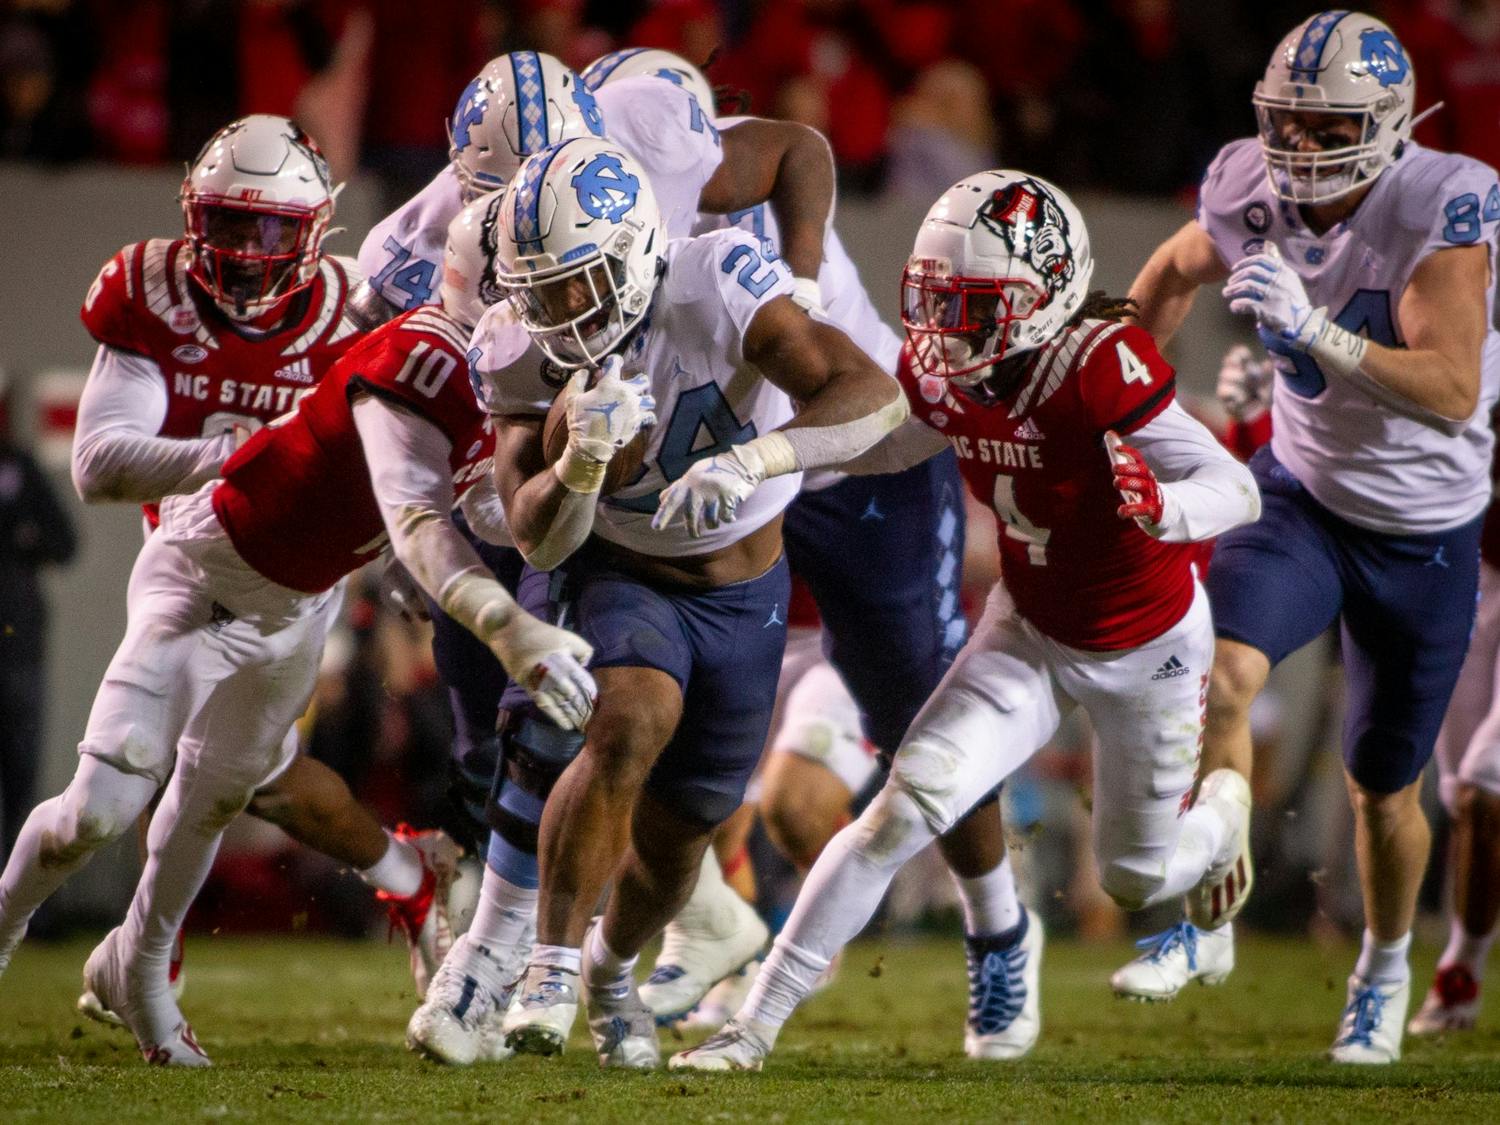 Gallery: UNC falls to NC State 34-30